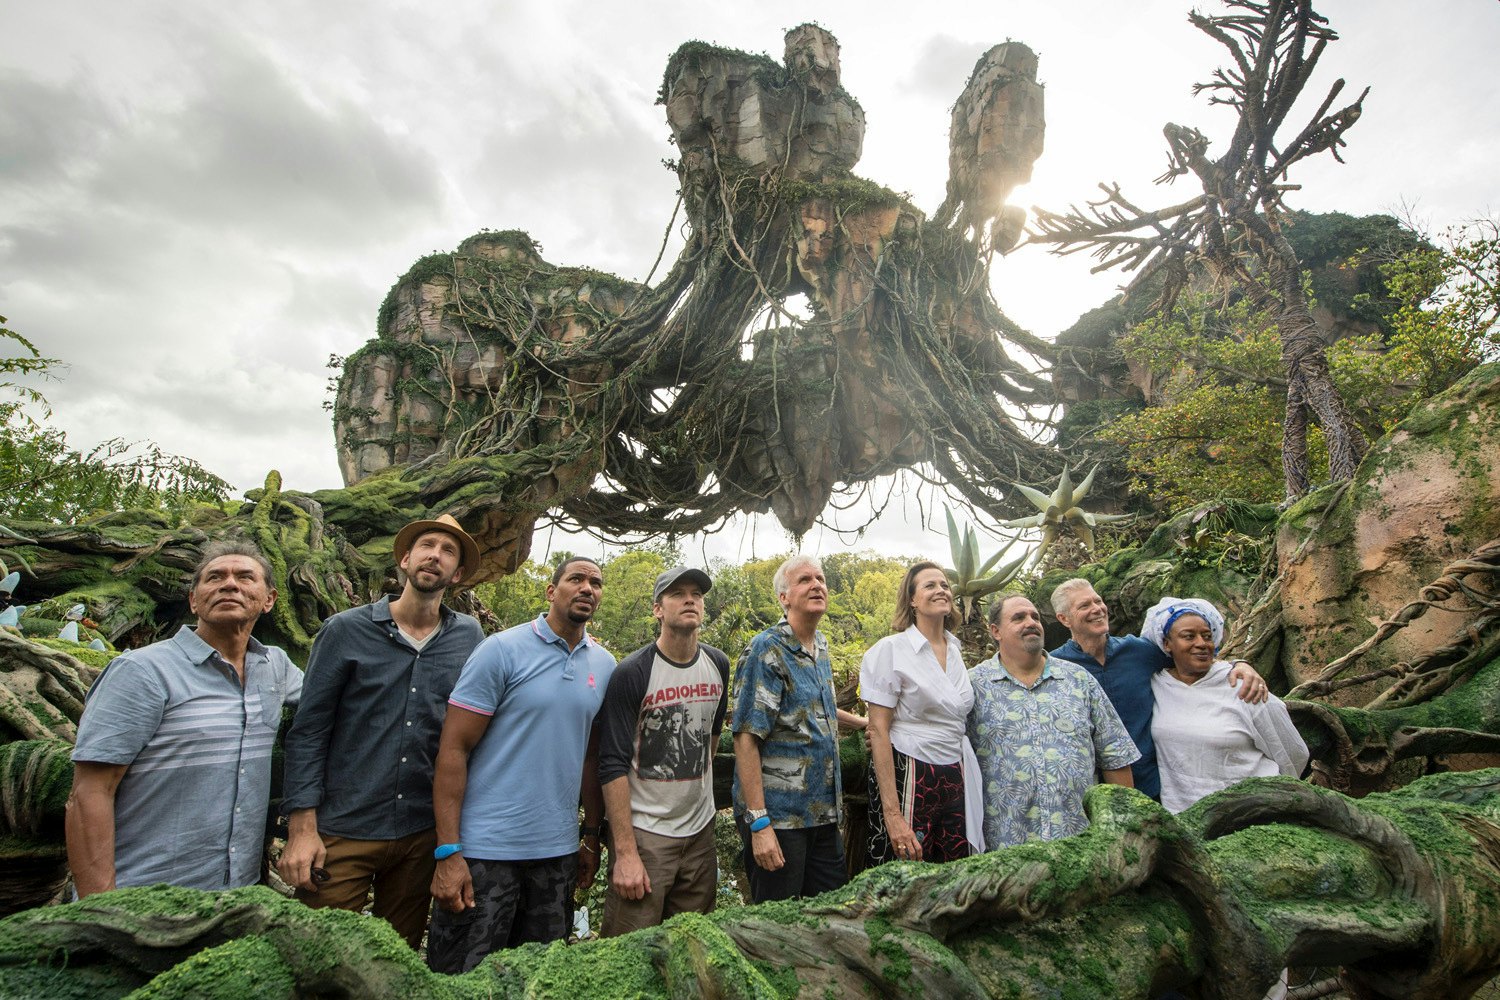 Avatar Land Revealed Set To Open In 2017 At Walt Disney World With New  Nighttime Animal Kingdom Entertainment  Inside the Magic